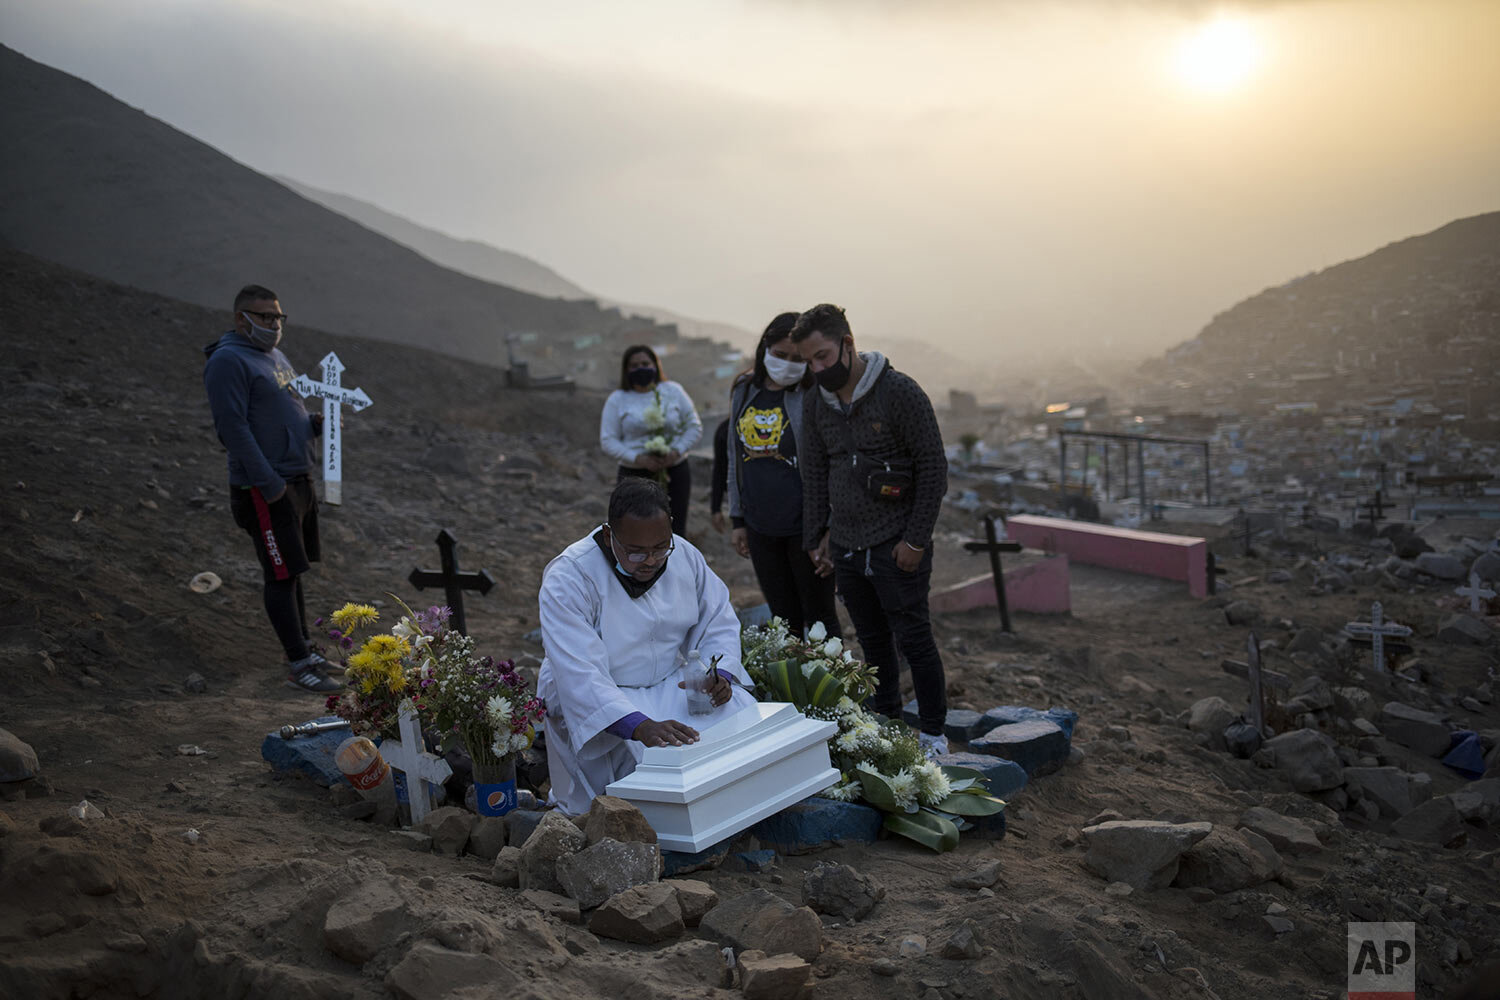  Brother Ronald Marin prays over the coffin that contains the remains of Keizer Quinones and Sarai Araujo’s unborn daughter, at a burial service in the “Martires 19 de Julio” cemetery in Comas, on the outskirts of Lima, Peru, Tuesday, July 21, 2020. 